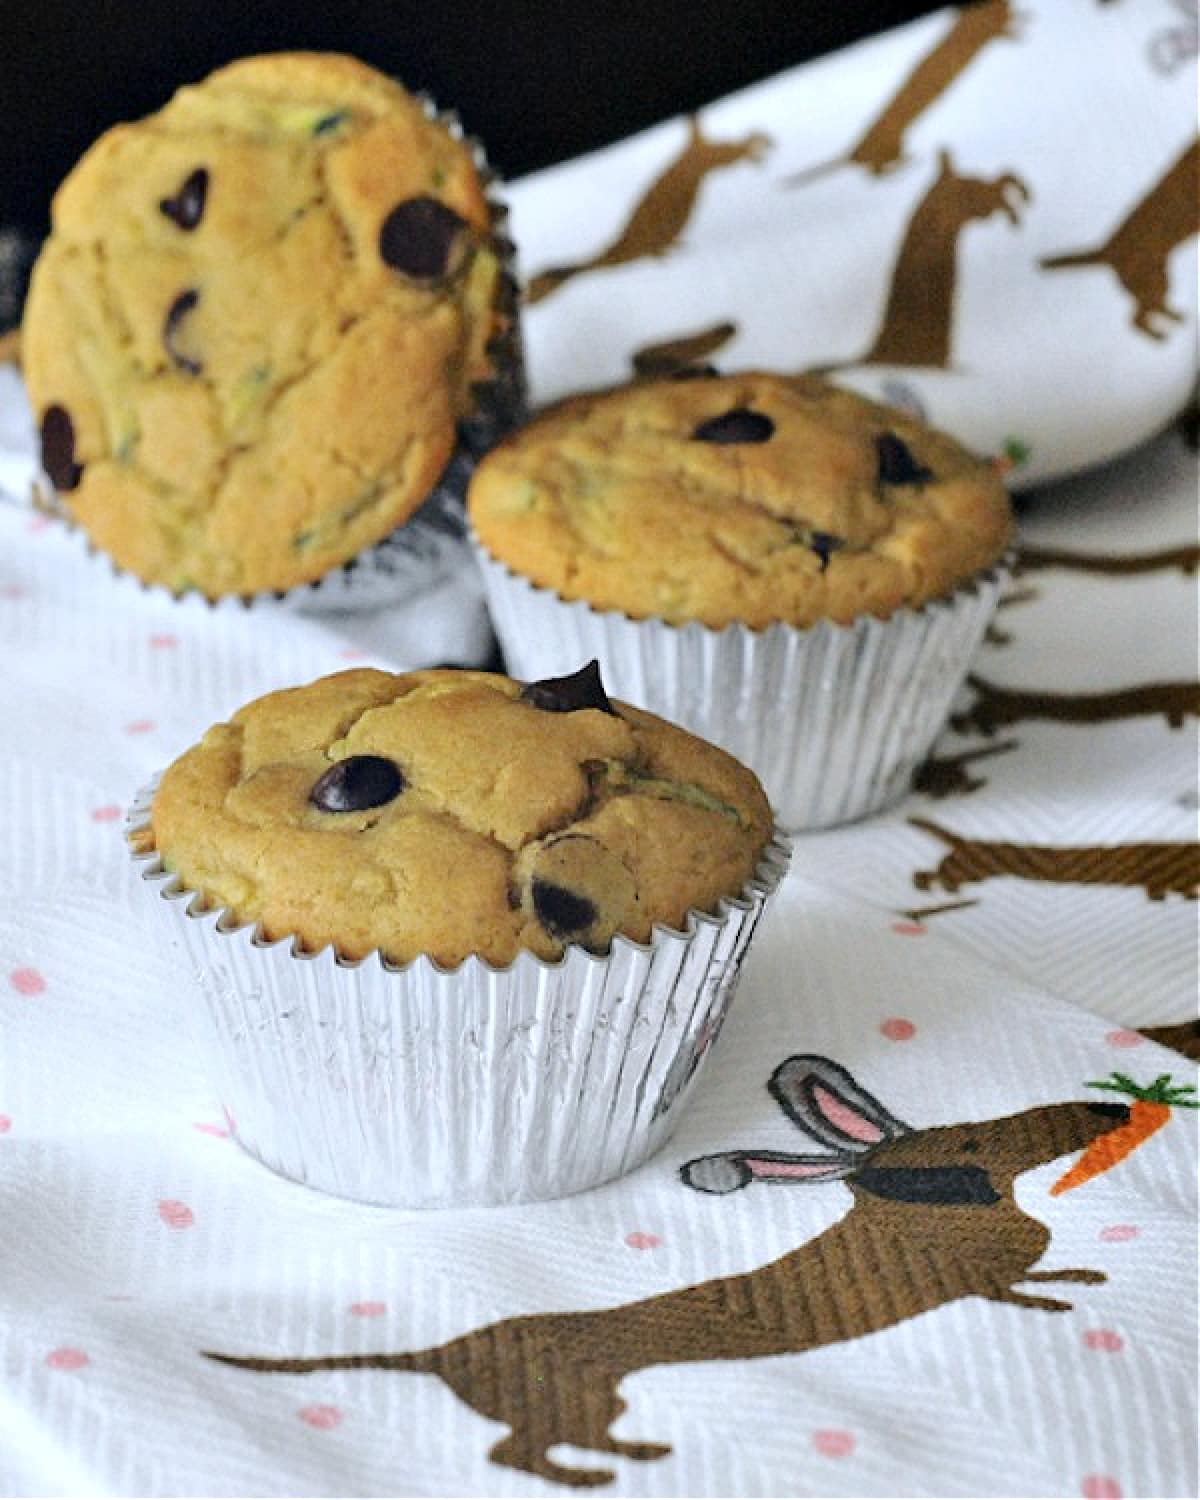 Three chocolate chip zucchini muffins sitting on a white cloth napkin printed with brown dachshund dogs on it.